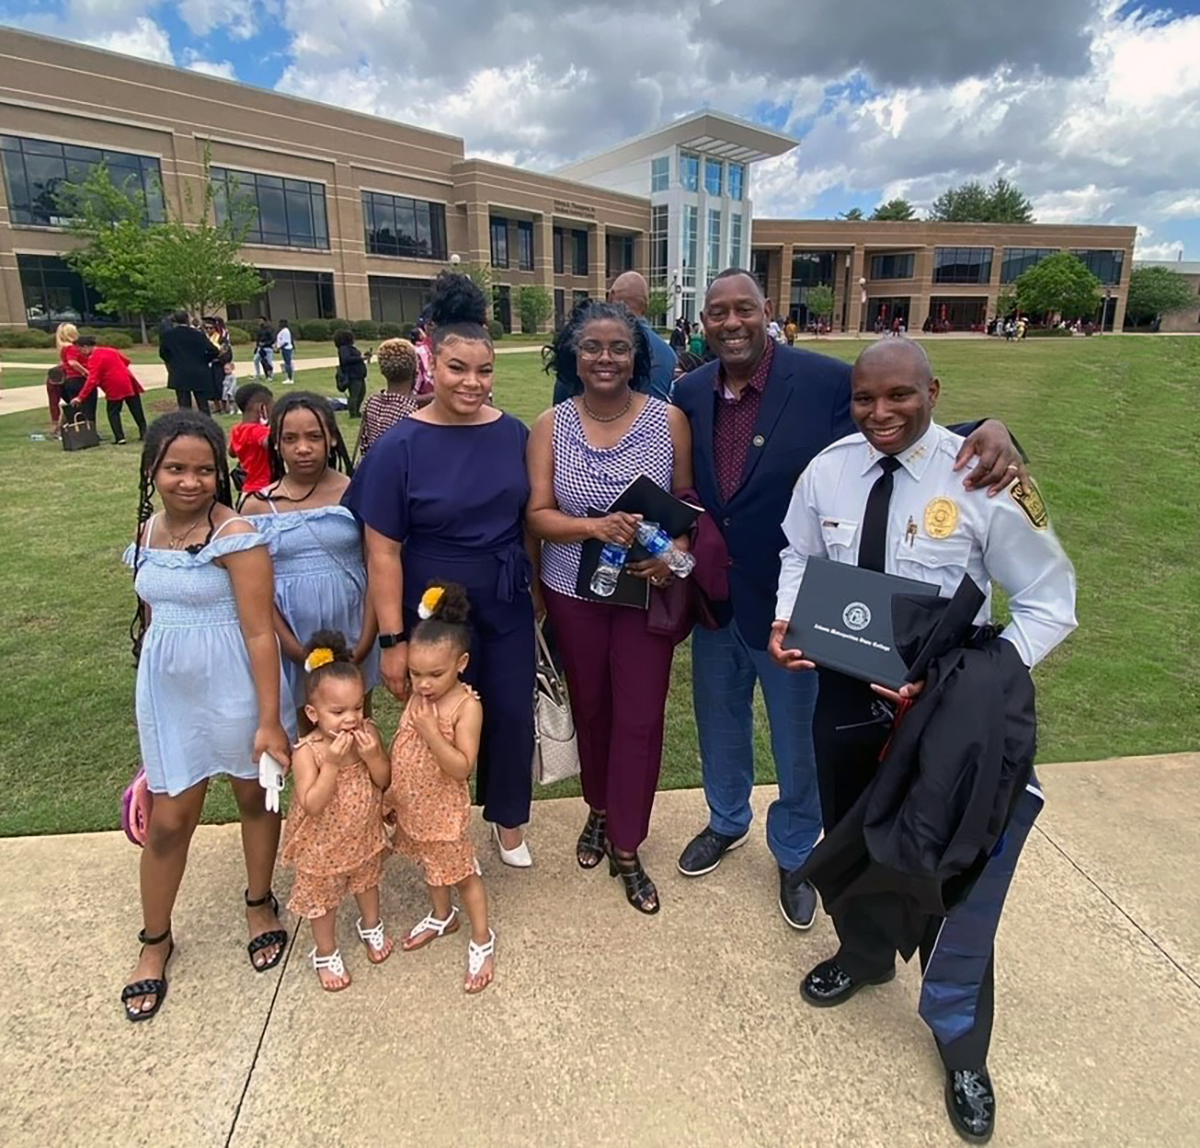 Family members of Marcus Hill (right) congratulate him at his graduation on May 6 from Atlanta Metropolitan State College with his bachelor’s degree in Criminal Justice. Also pictured (from left, front) are daughters Oakley and Ivy Hill; (from left, back) daughters Shanelle and Danielle Hill, wife Kieriea Hill, godmother Peggy Jordan and godfather Dr. C.L. Jordan, president of Carver Bible College. Not pictured are daughters Armani and Amir Hill.